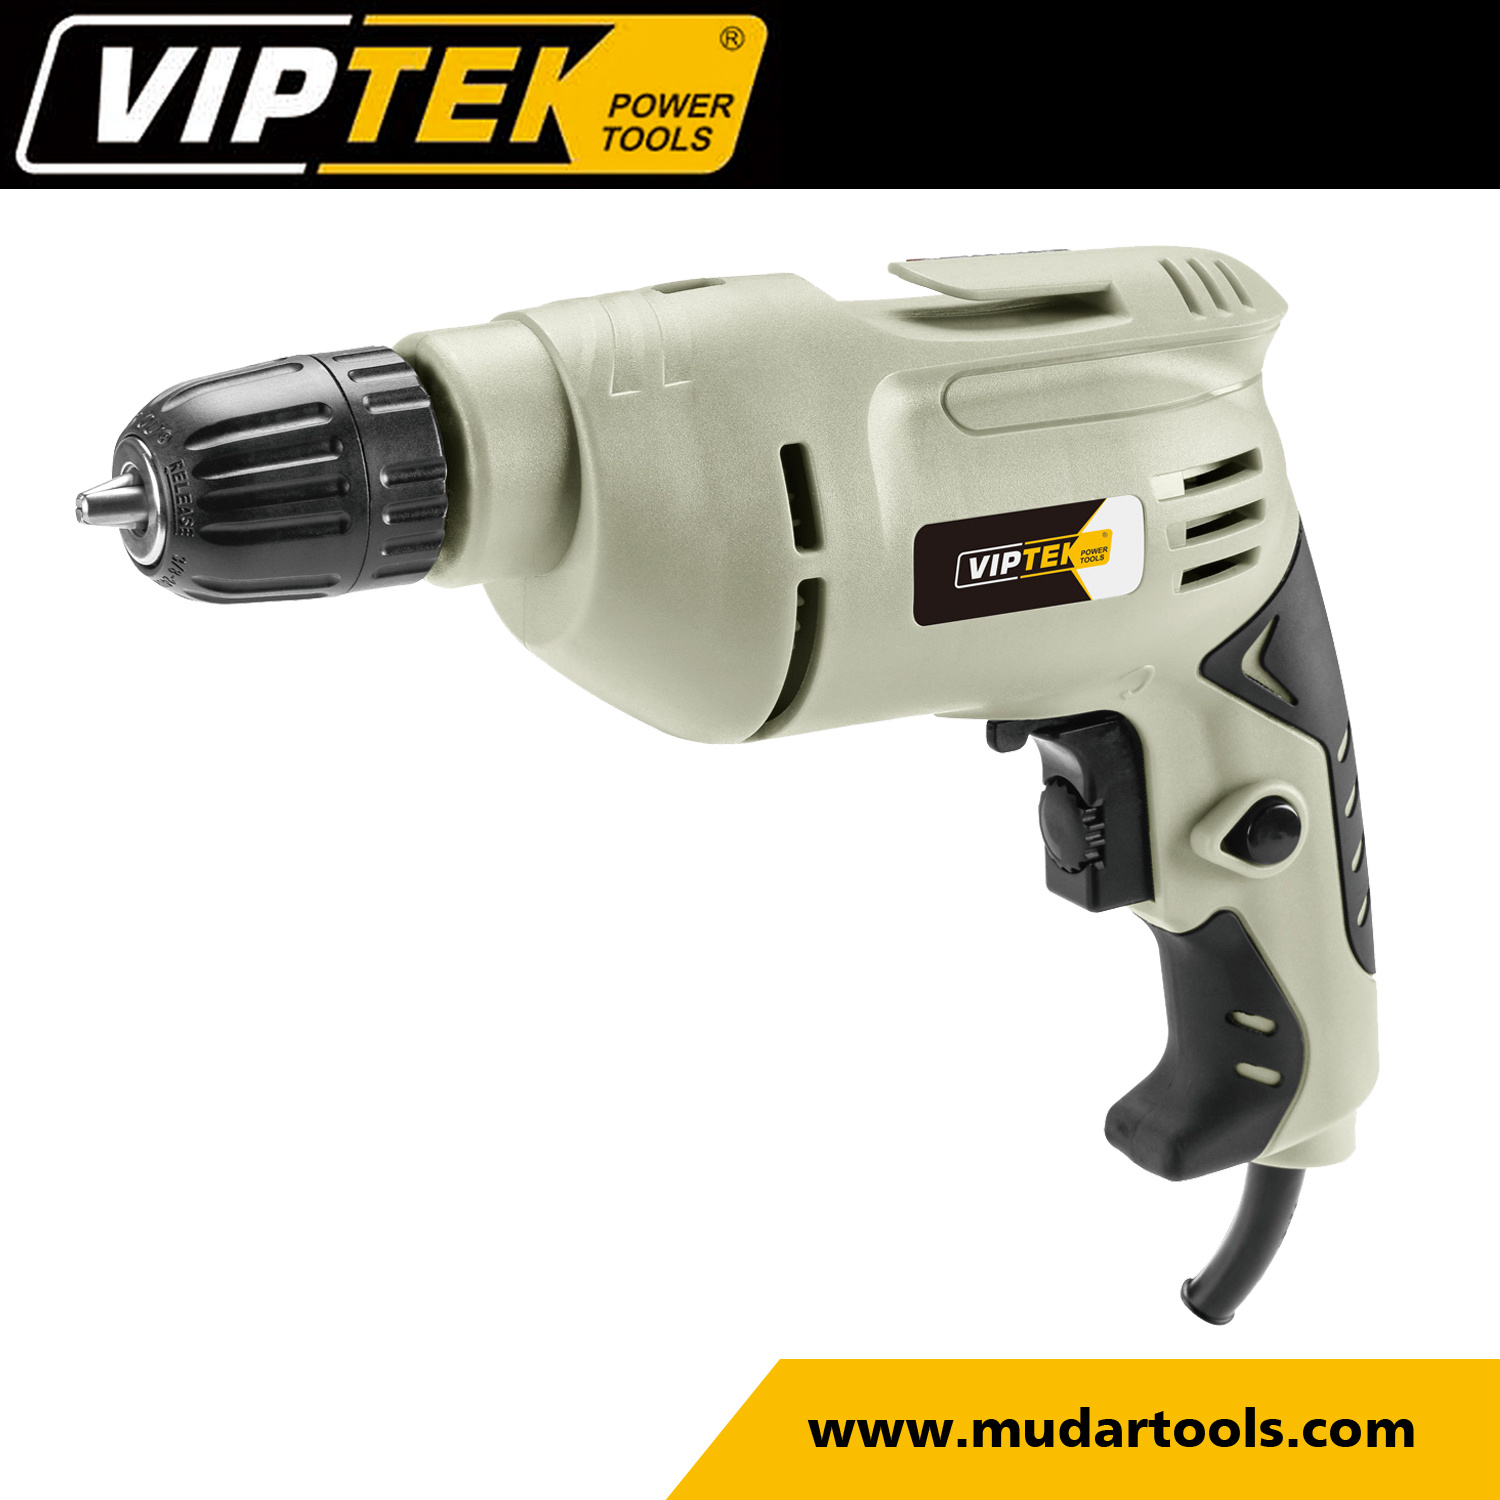 10mm 600W Variable Speed Electric Drill (T10600)